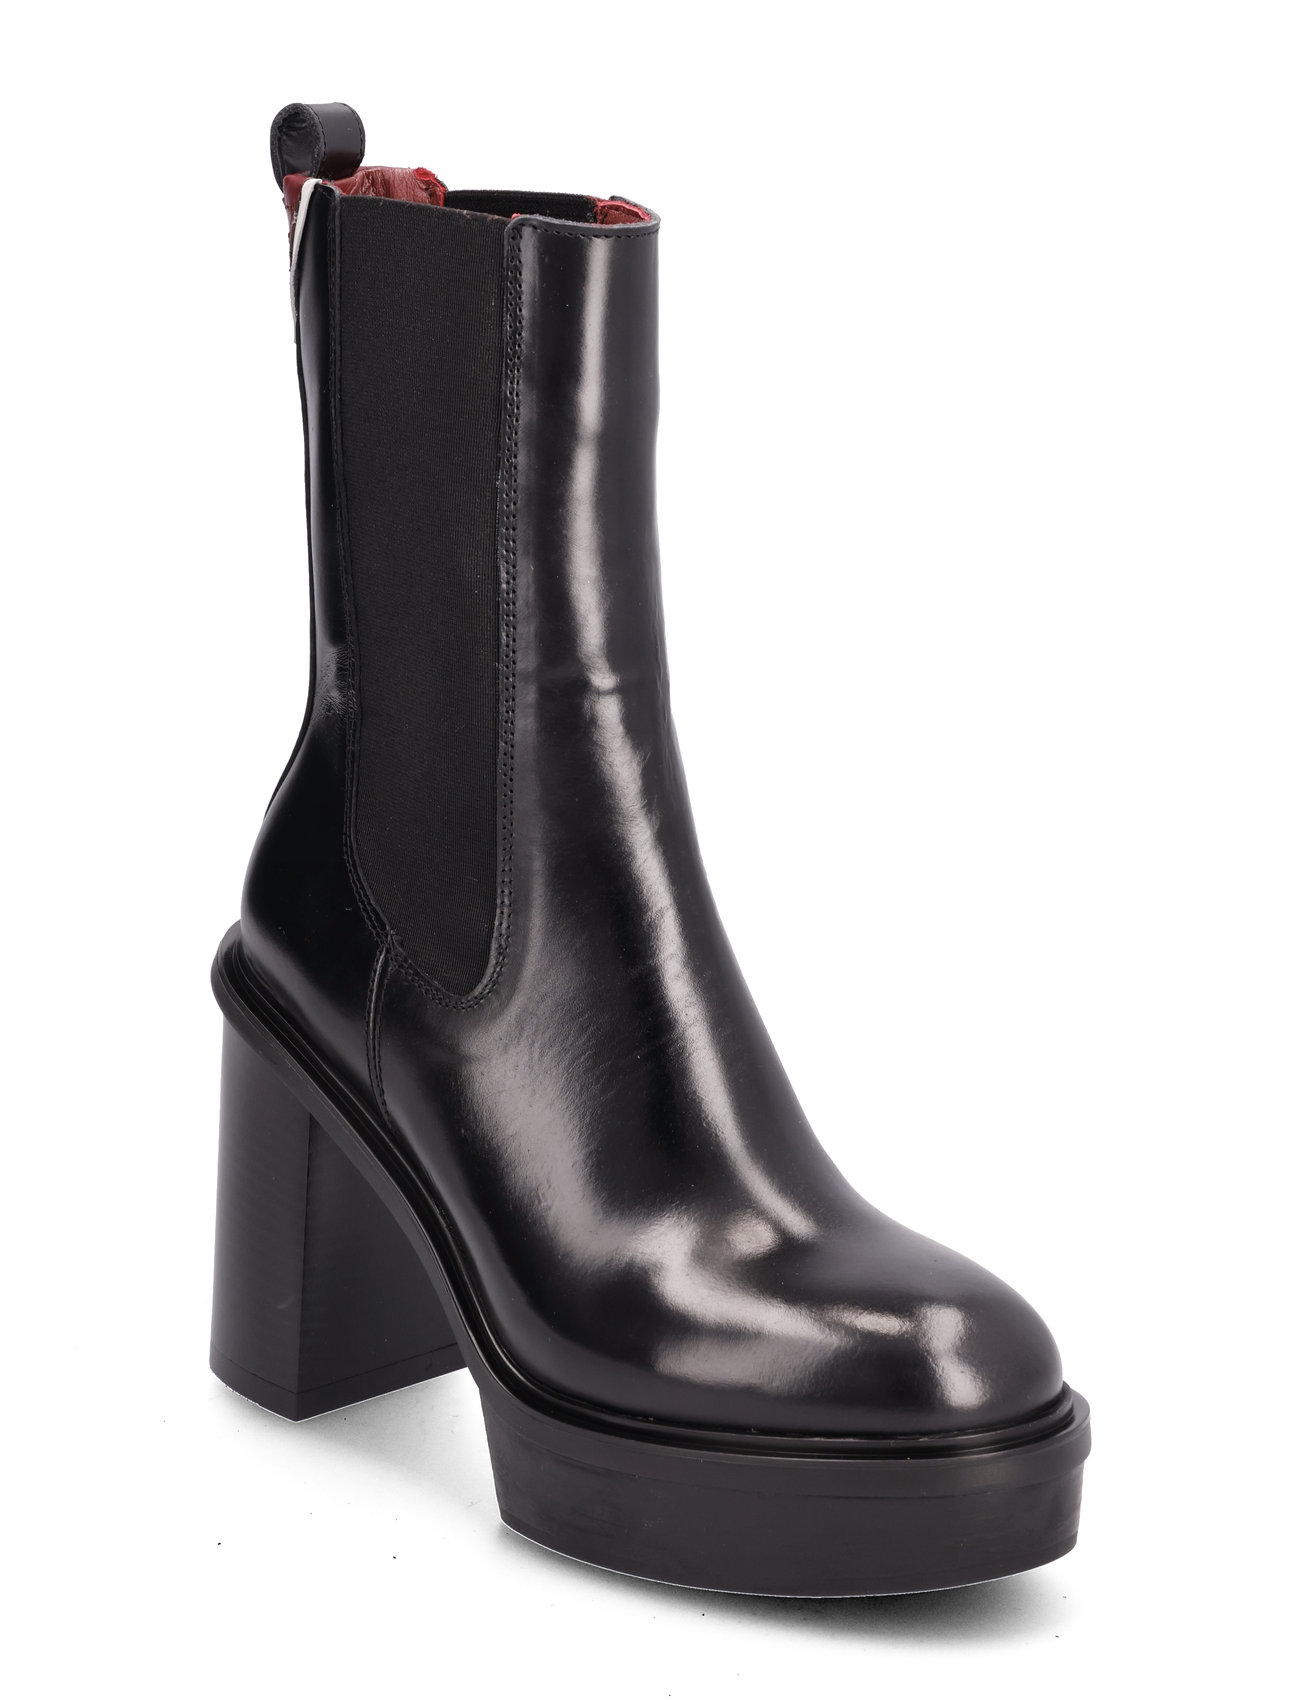 Elevated Plateau Chelsea Bootie Shoes Chelsea Boots Black Tommy Hilfiger